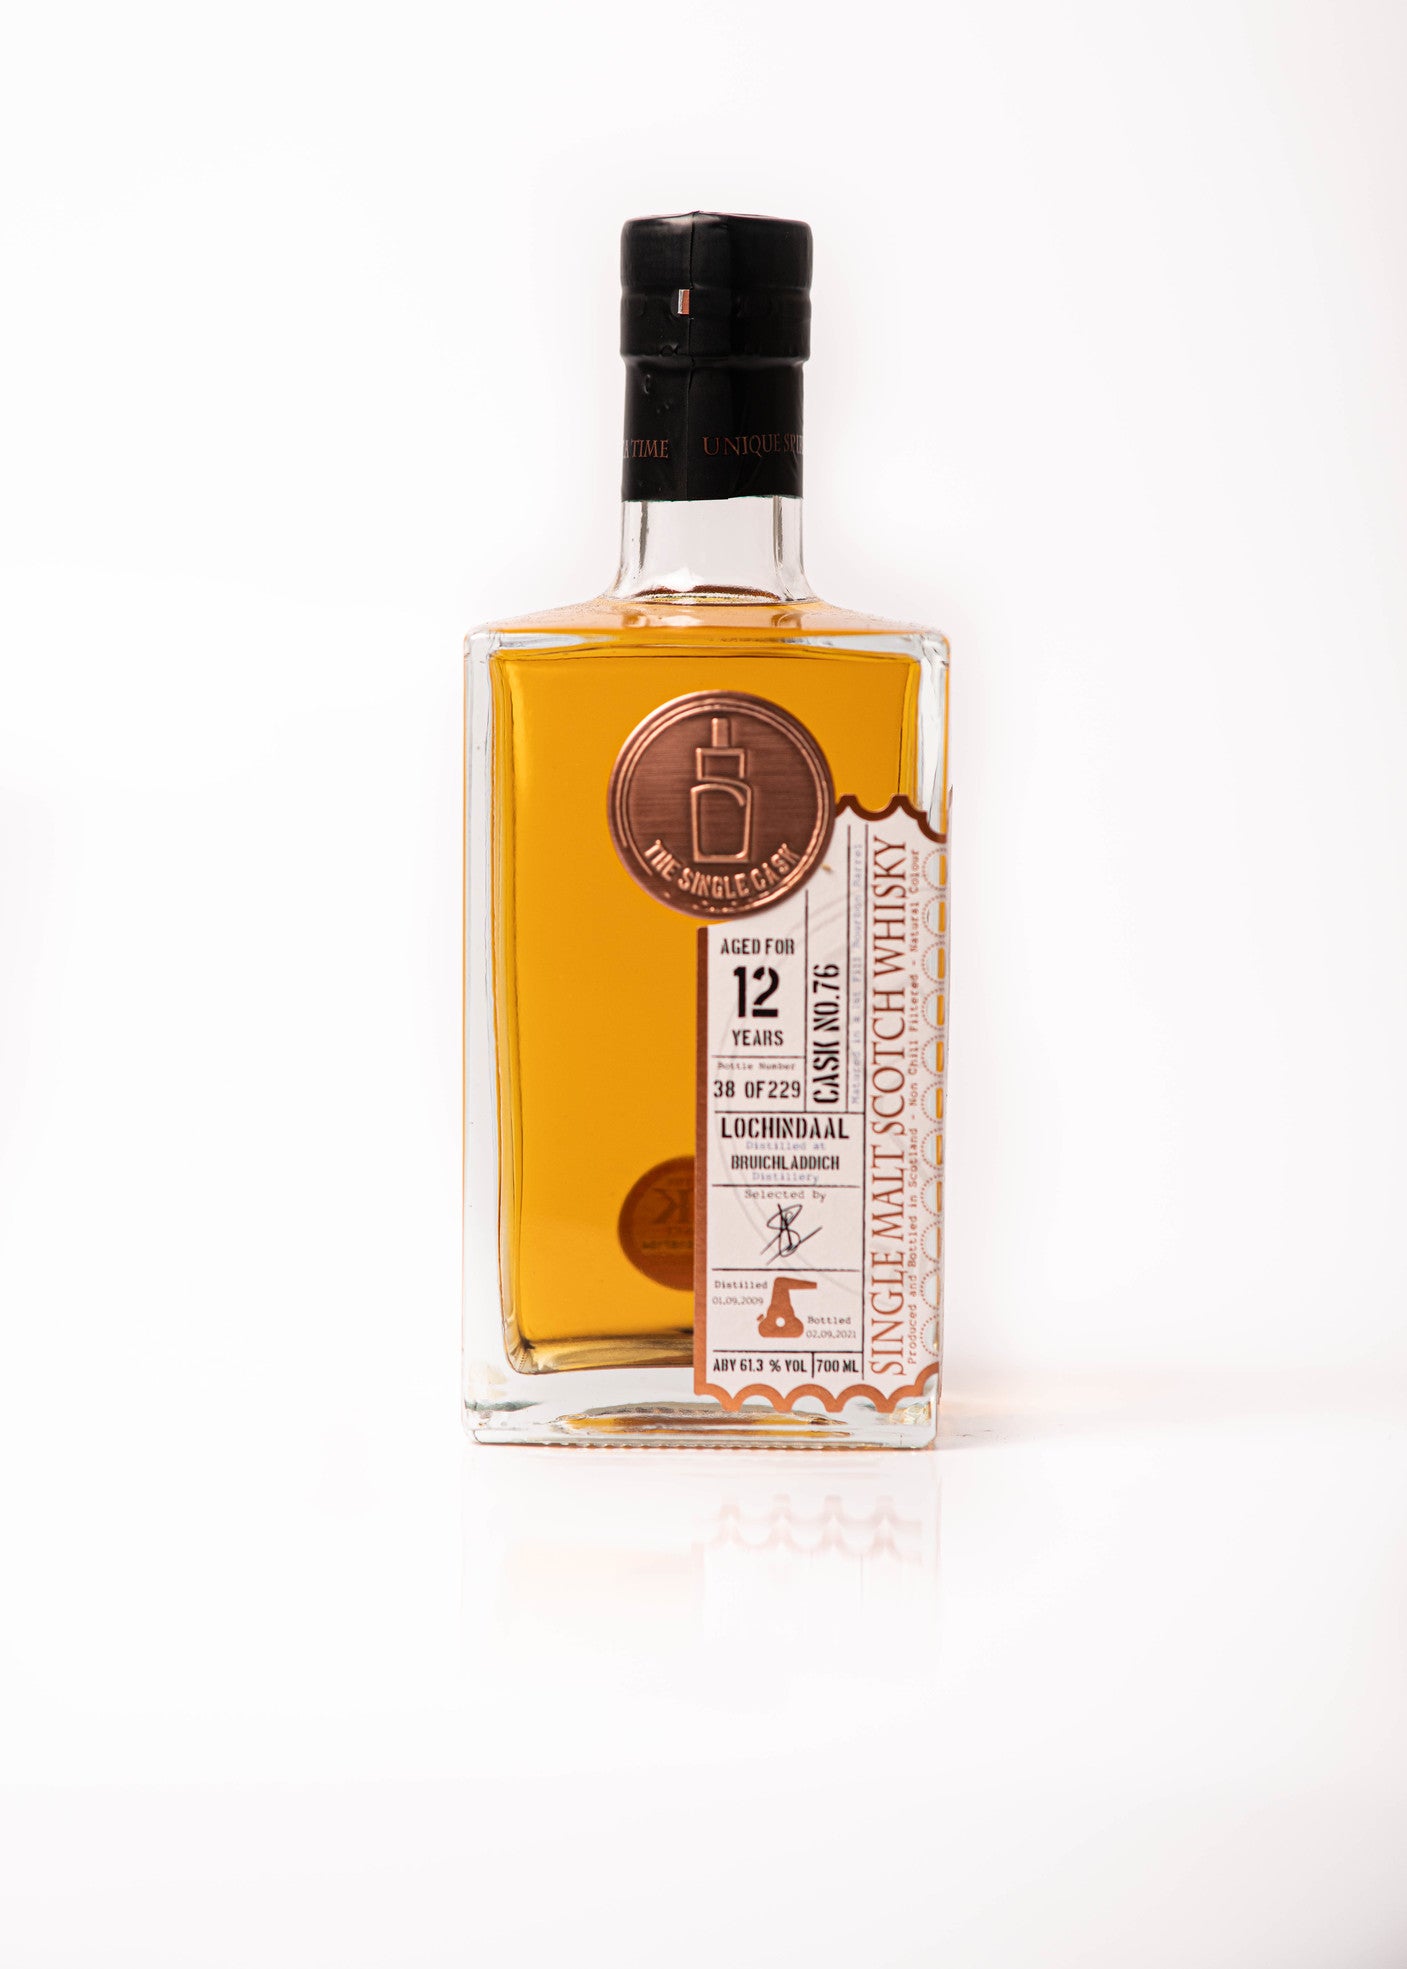 Bruichladdich Lochindaal 12 years old scotch whisky from The Single Cask